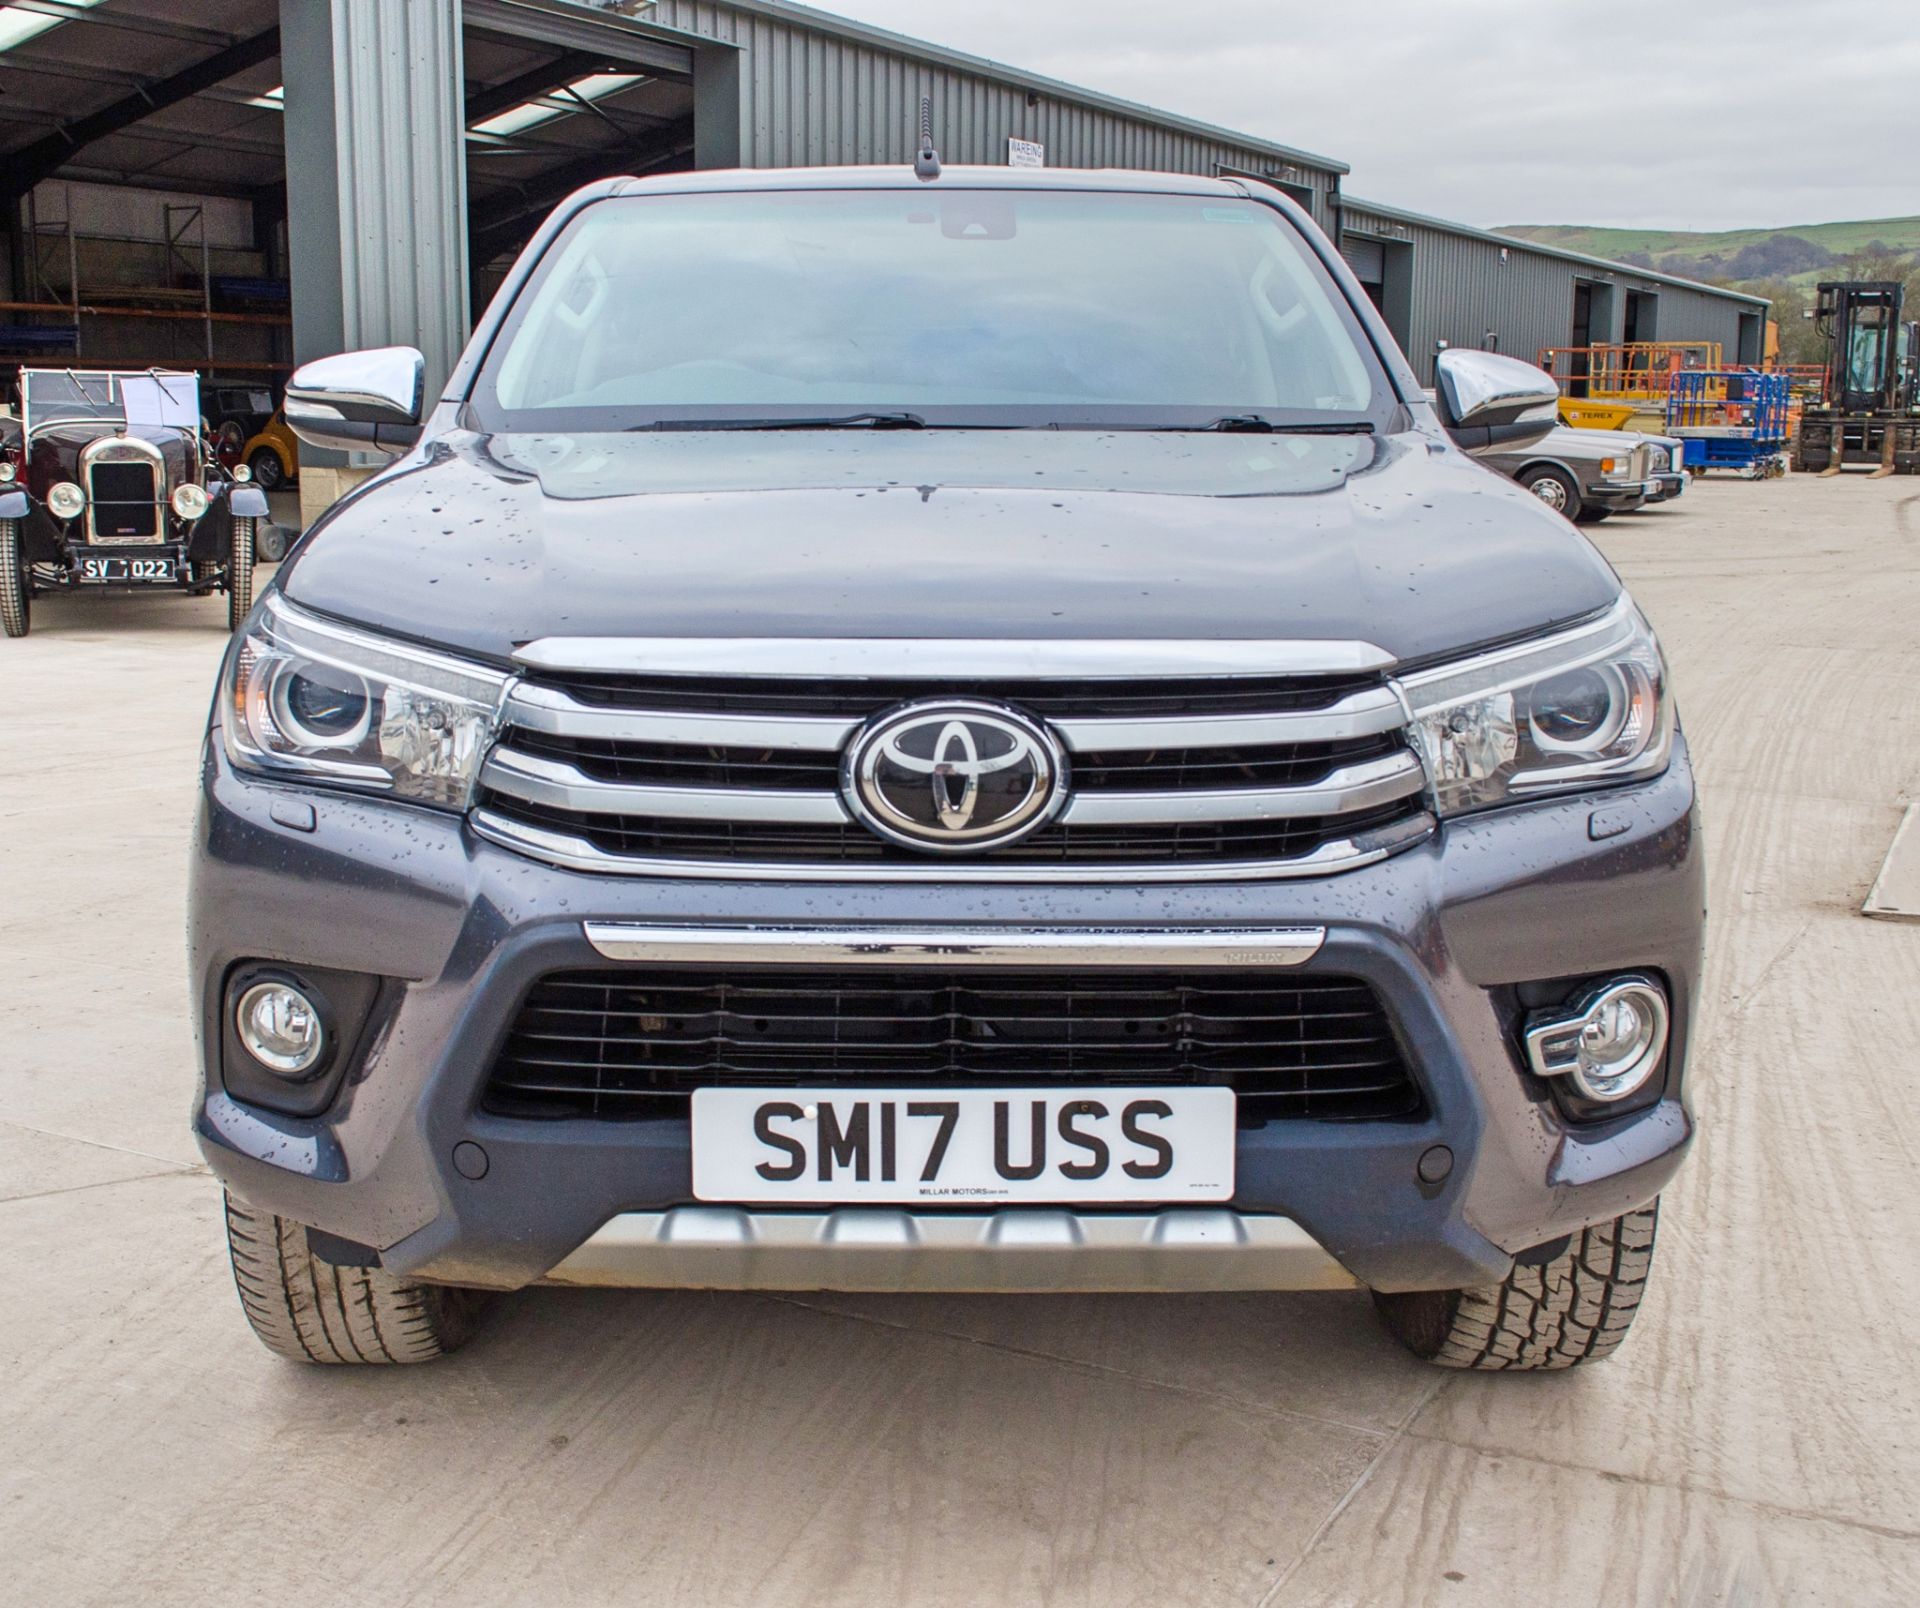 Toyota Hilux Invincible D-4D 4WD DCB light 4x4 utility vehicle Registration Number: SM17 USS Date of - Image 5 of 33